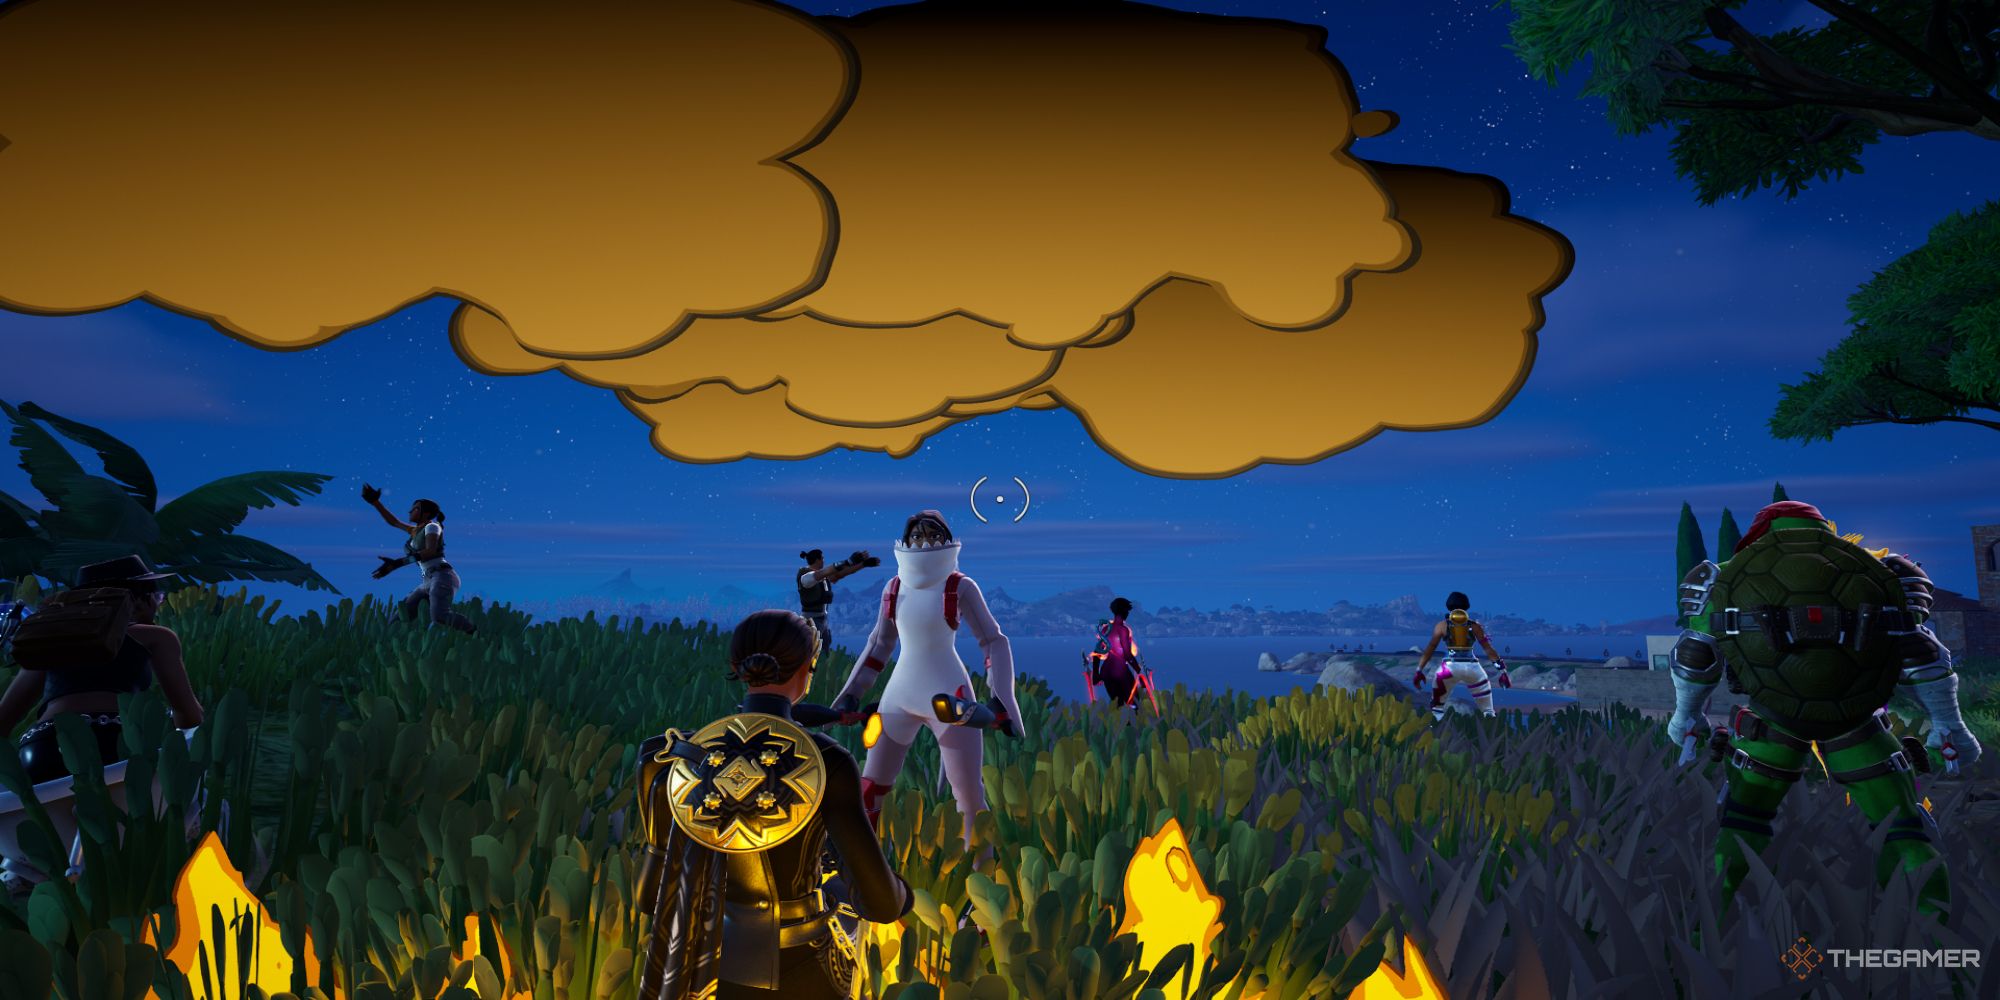 A screenshot from Fortnite showing several players standing next to each other in the lobby using emotes to communicate